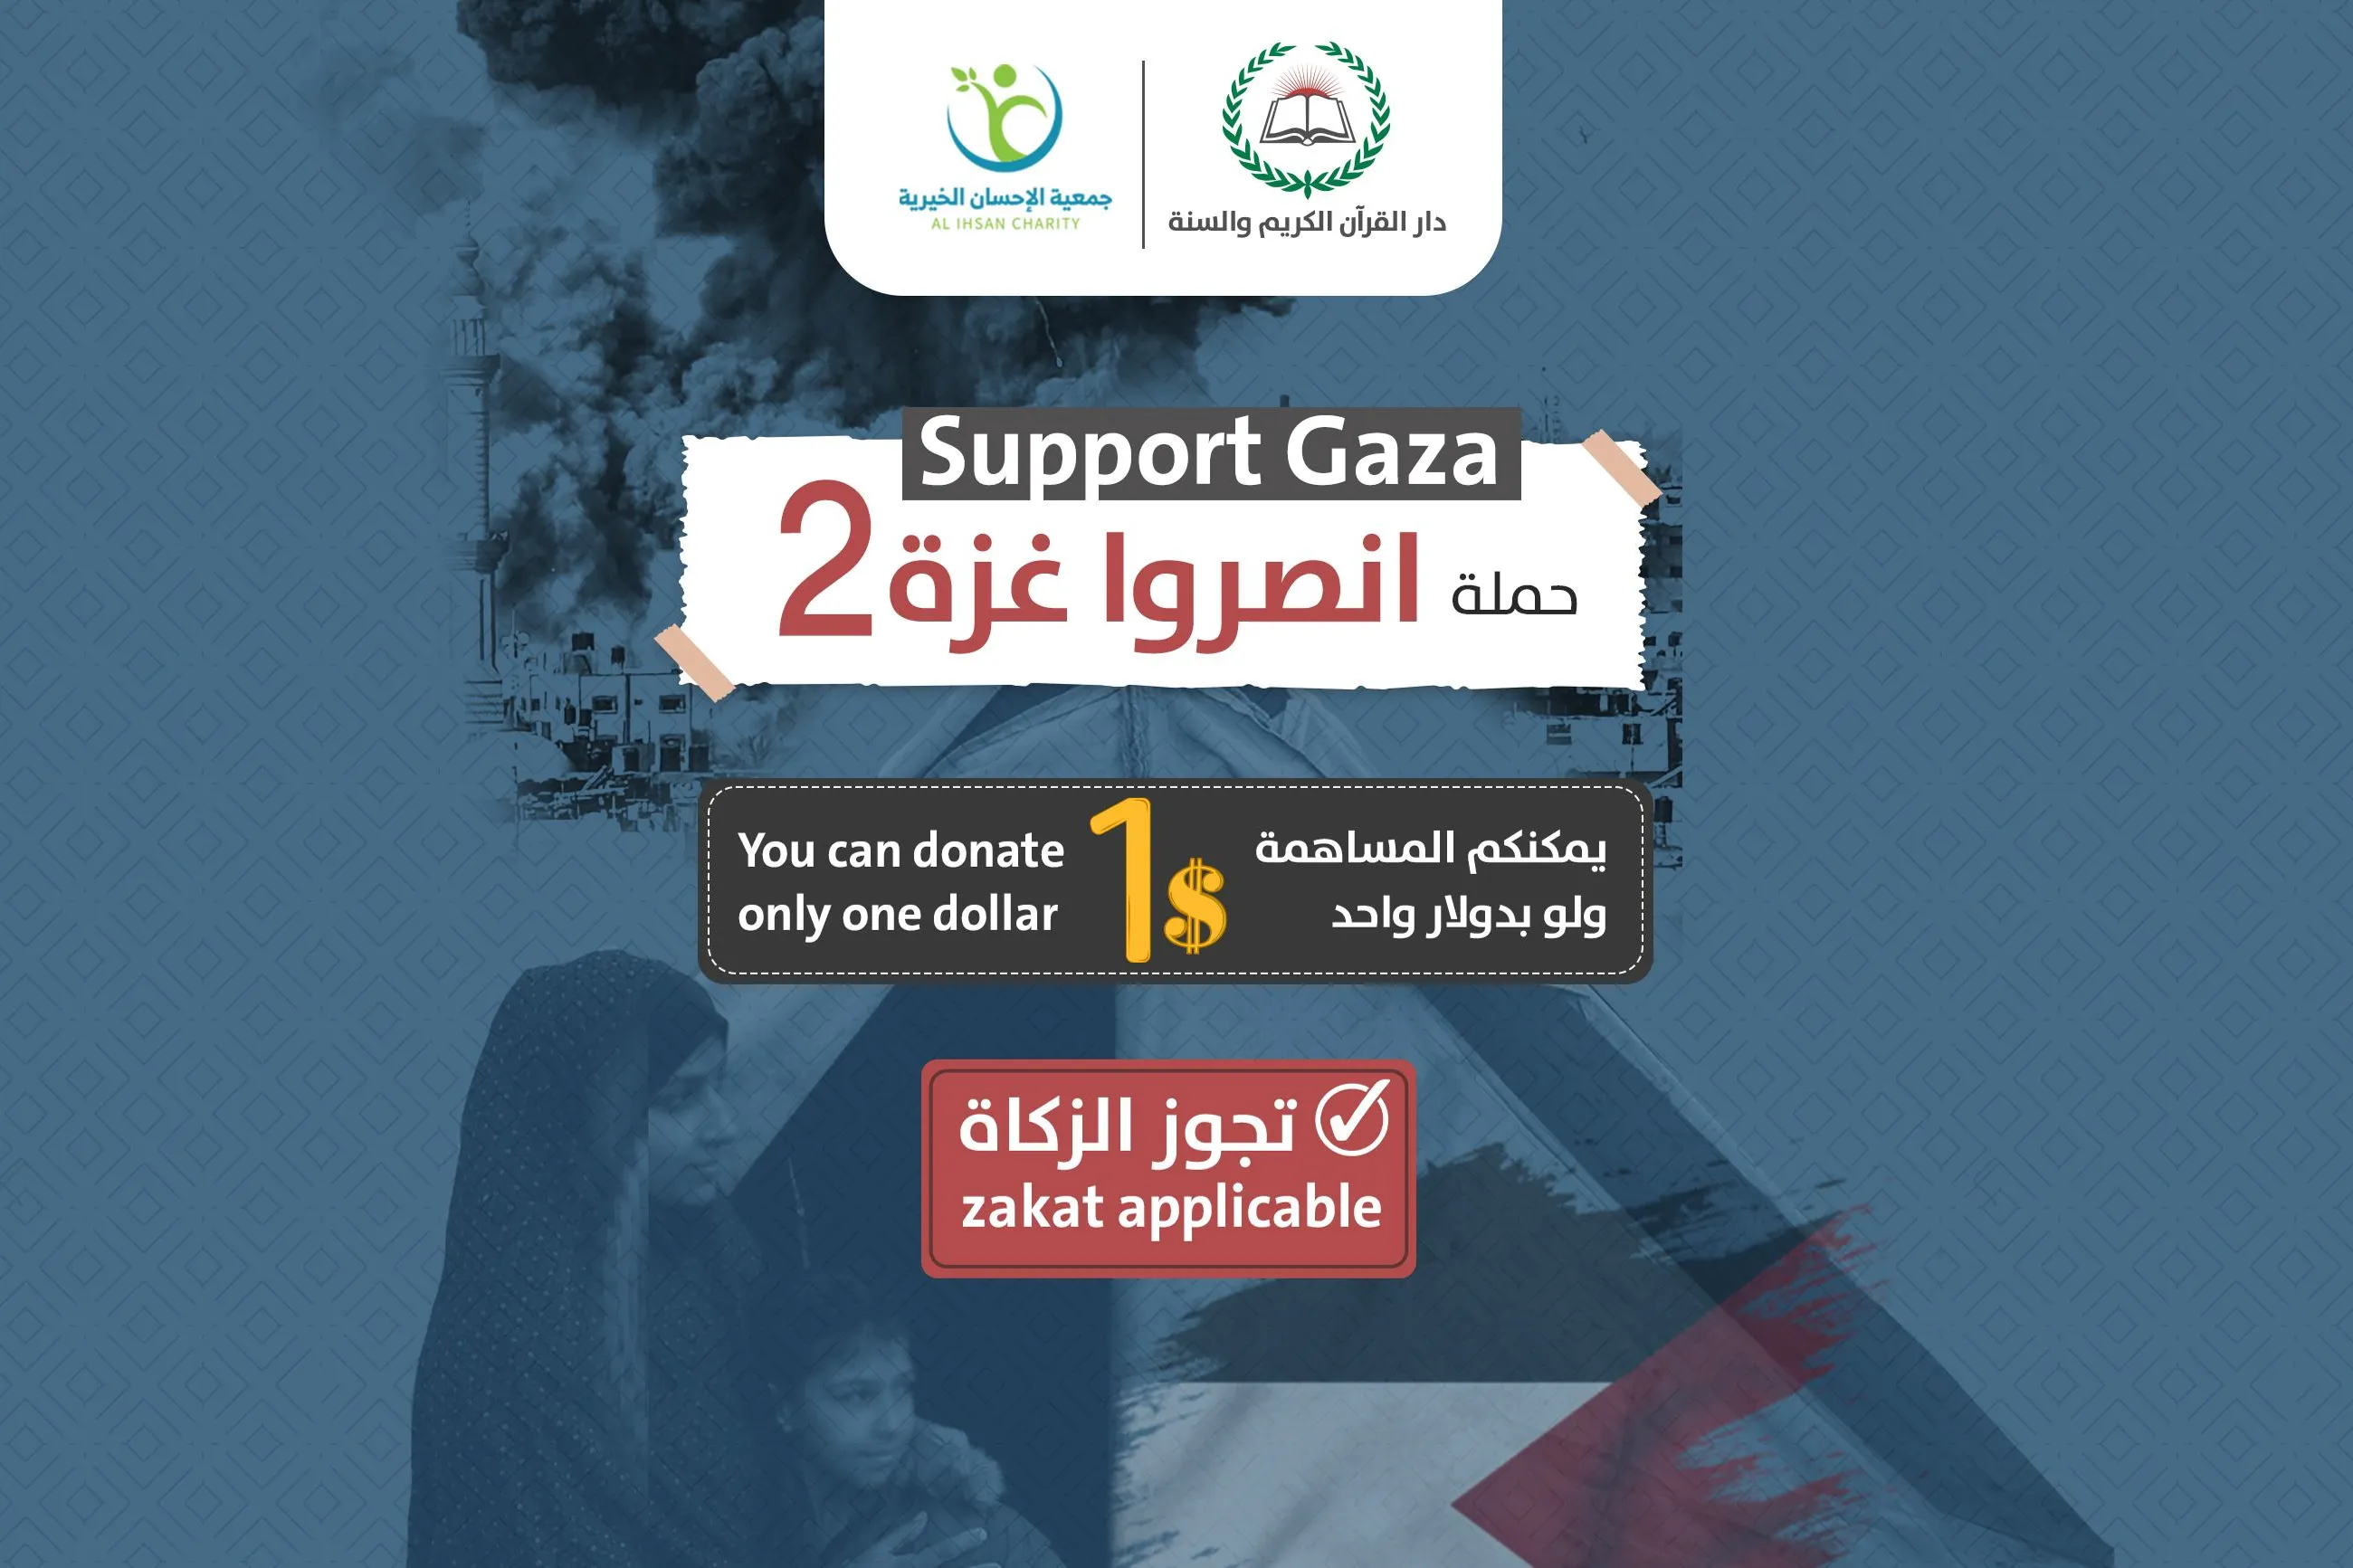 Support Gaza campaign to support our people in the Gaza Strip